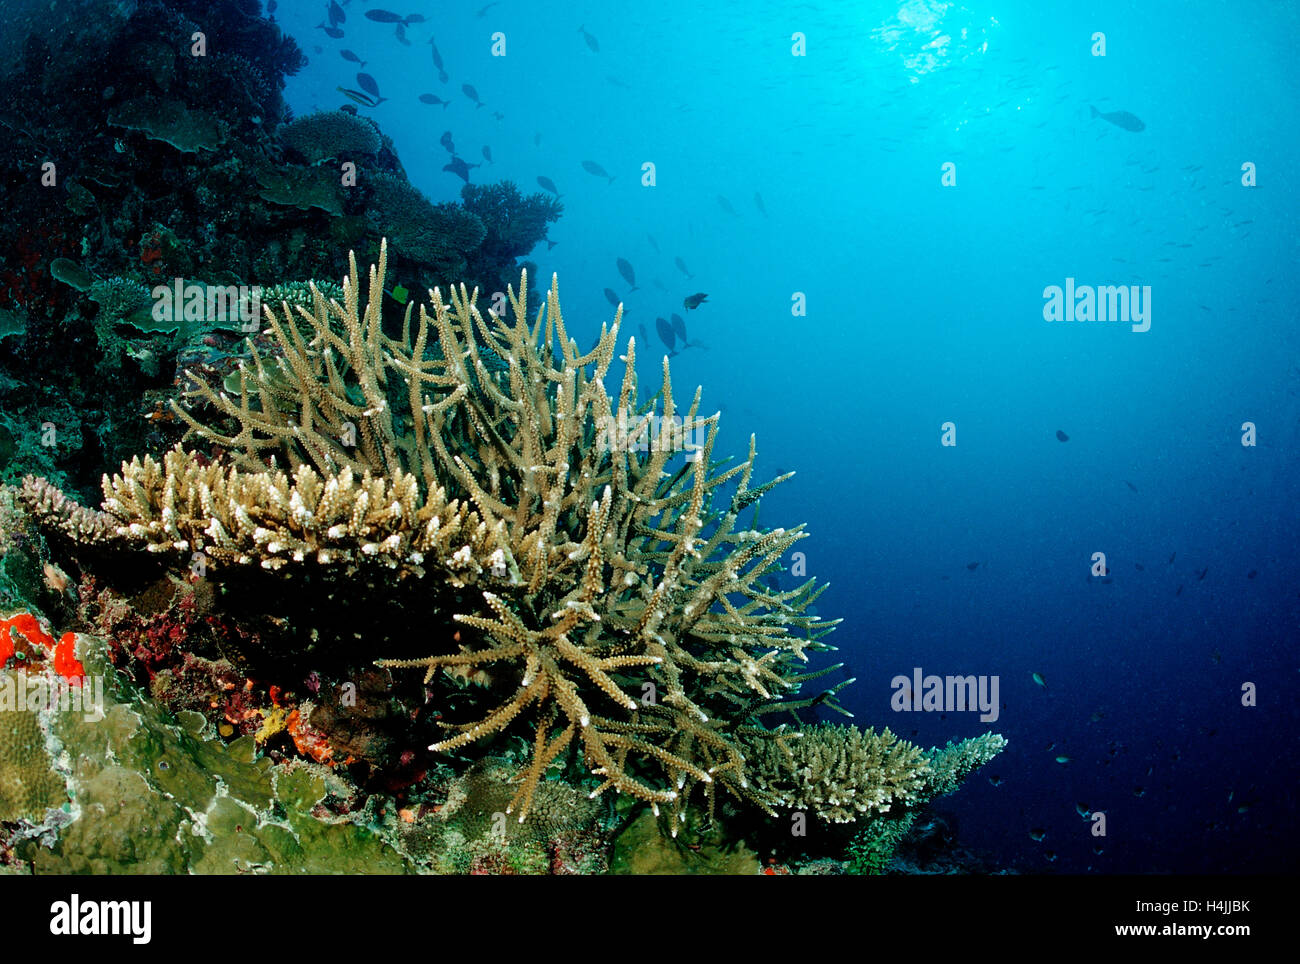 Reef with Elkhorn Corals and Table Corals (Acropora), Maldives, Indian ...